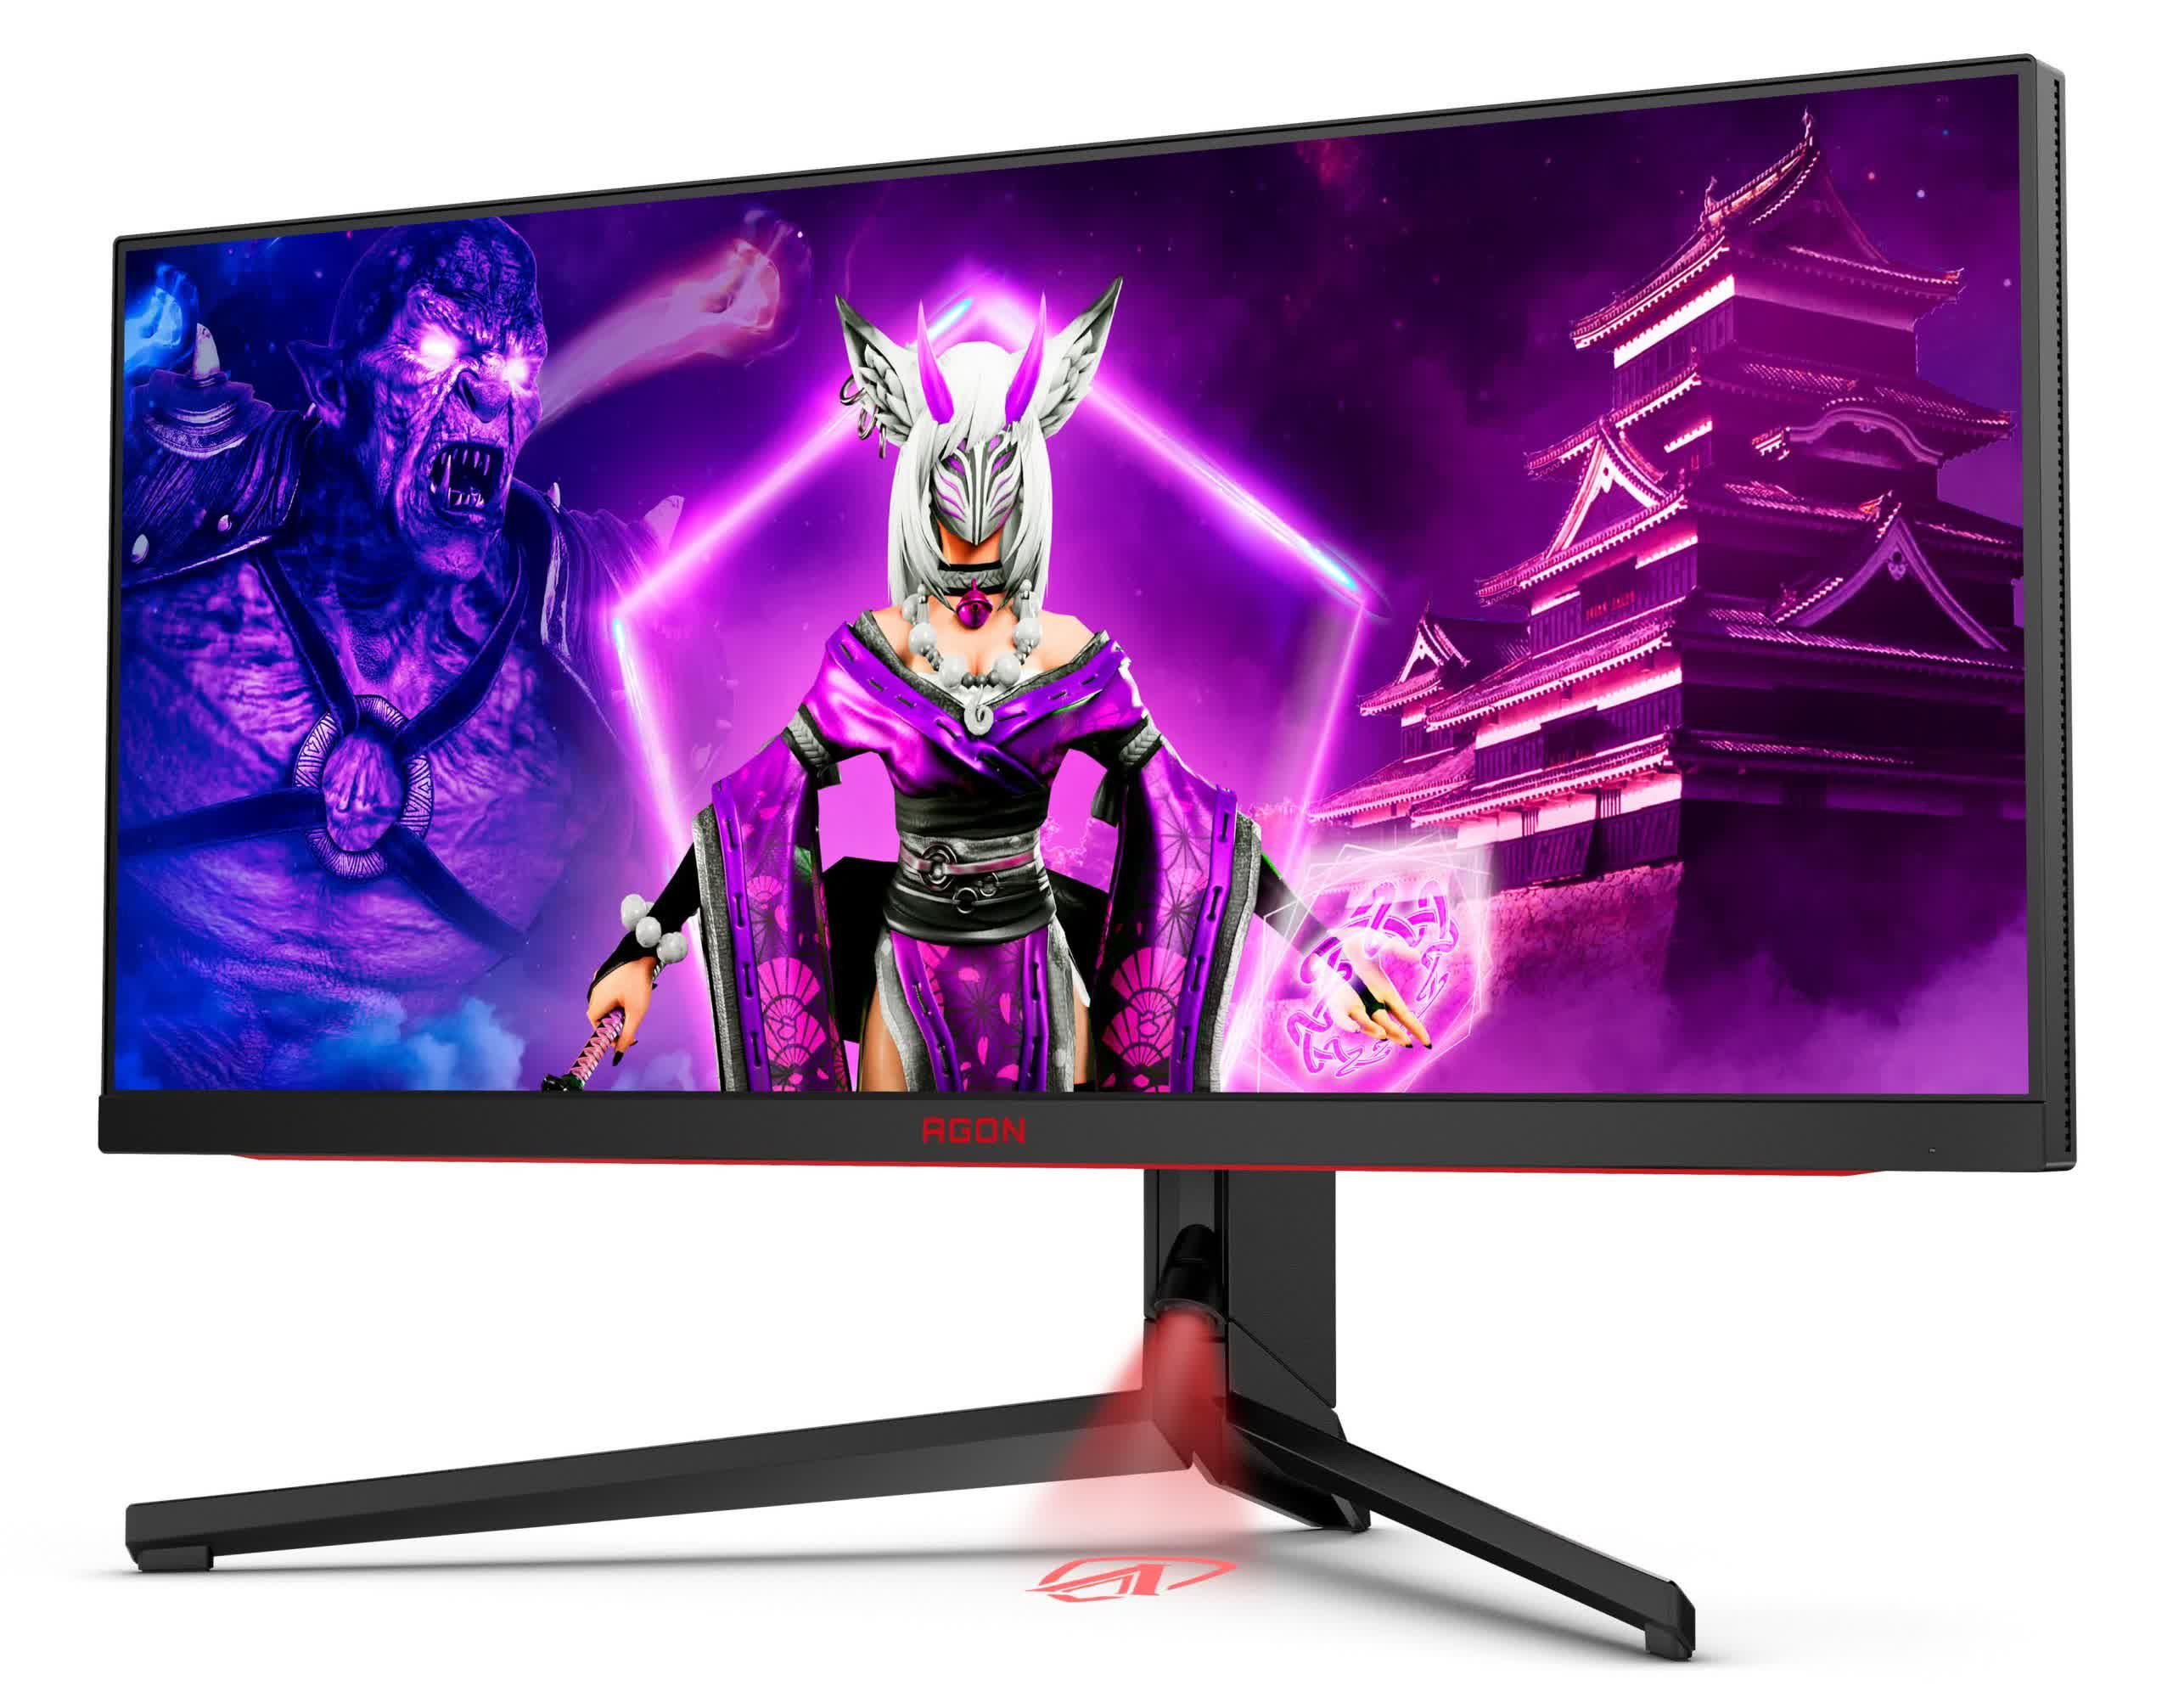 The AOC Agon Pro AG344UXM is a 32-inch 1440p mini LED monitor with a 170 Hz refresh rate